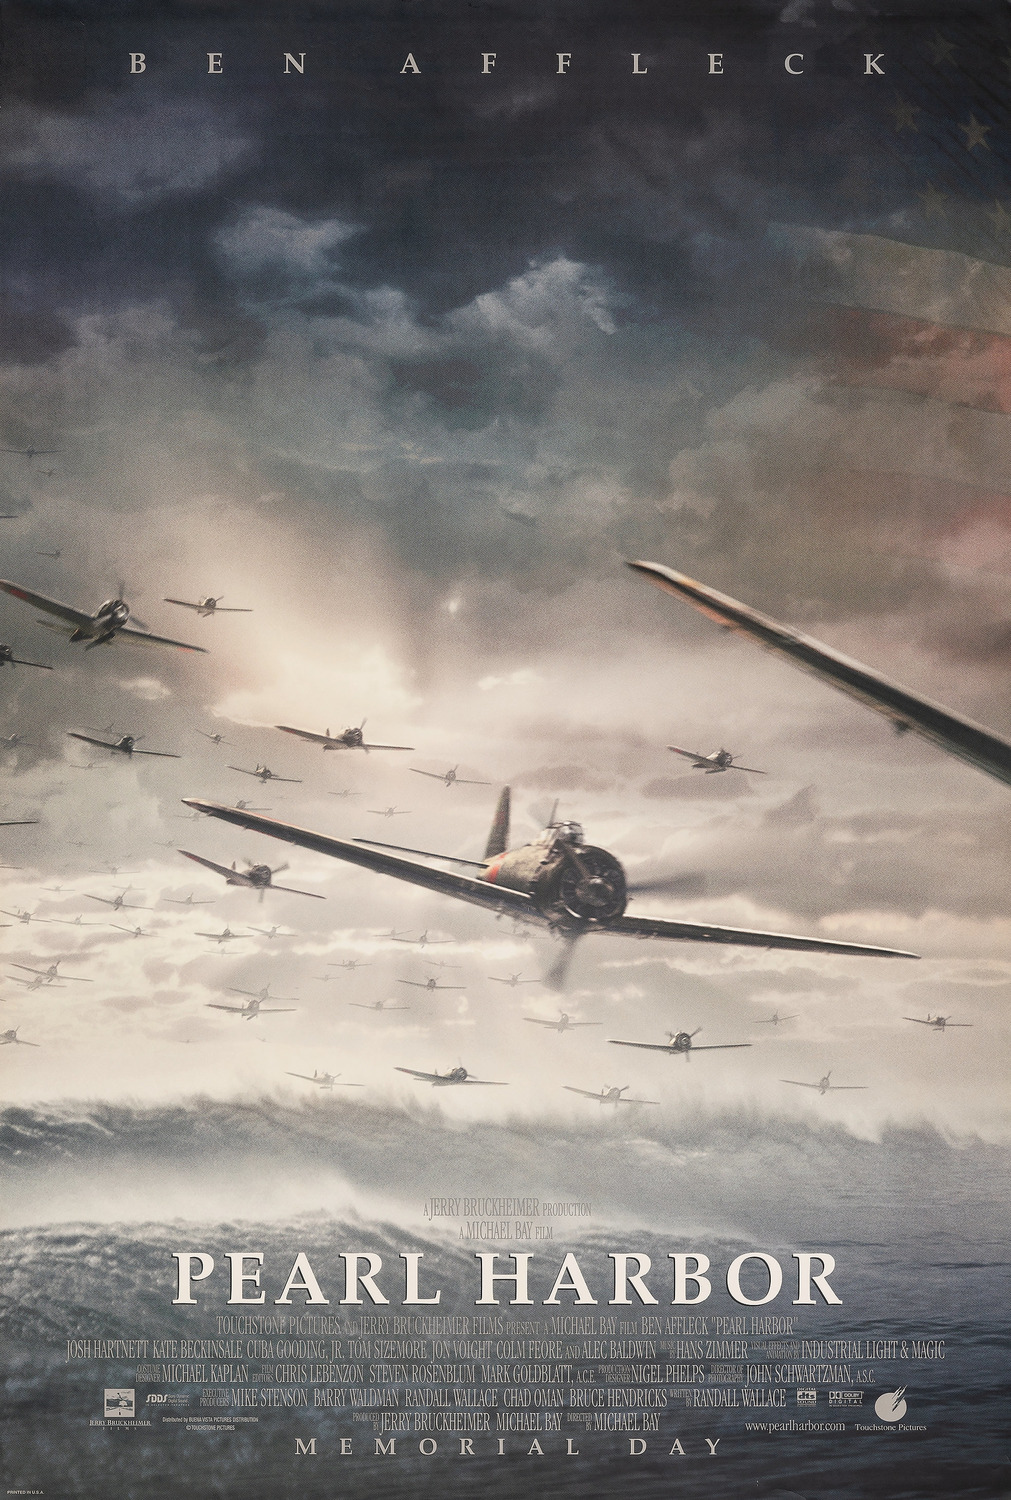 Extra Large Movie Poster Image for Pearl Harbor (#7 of 12)